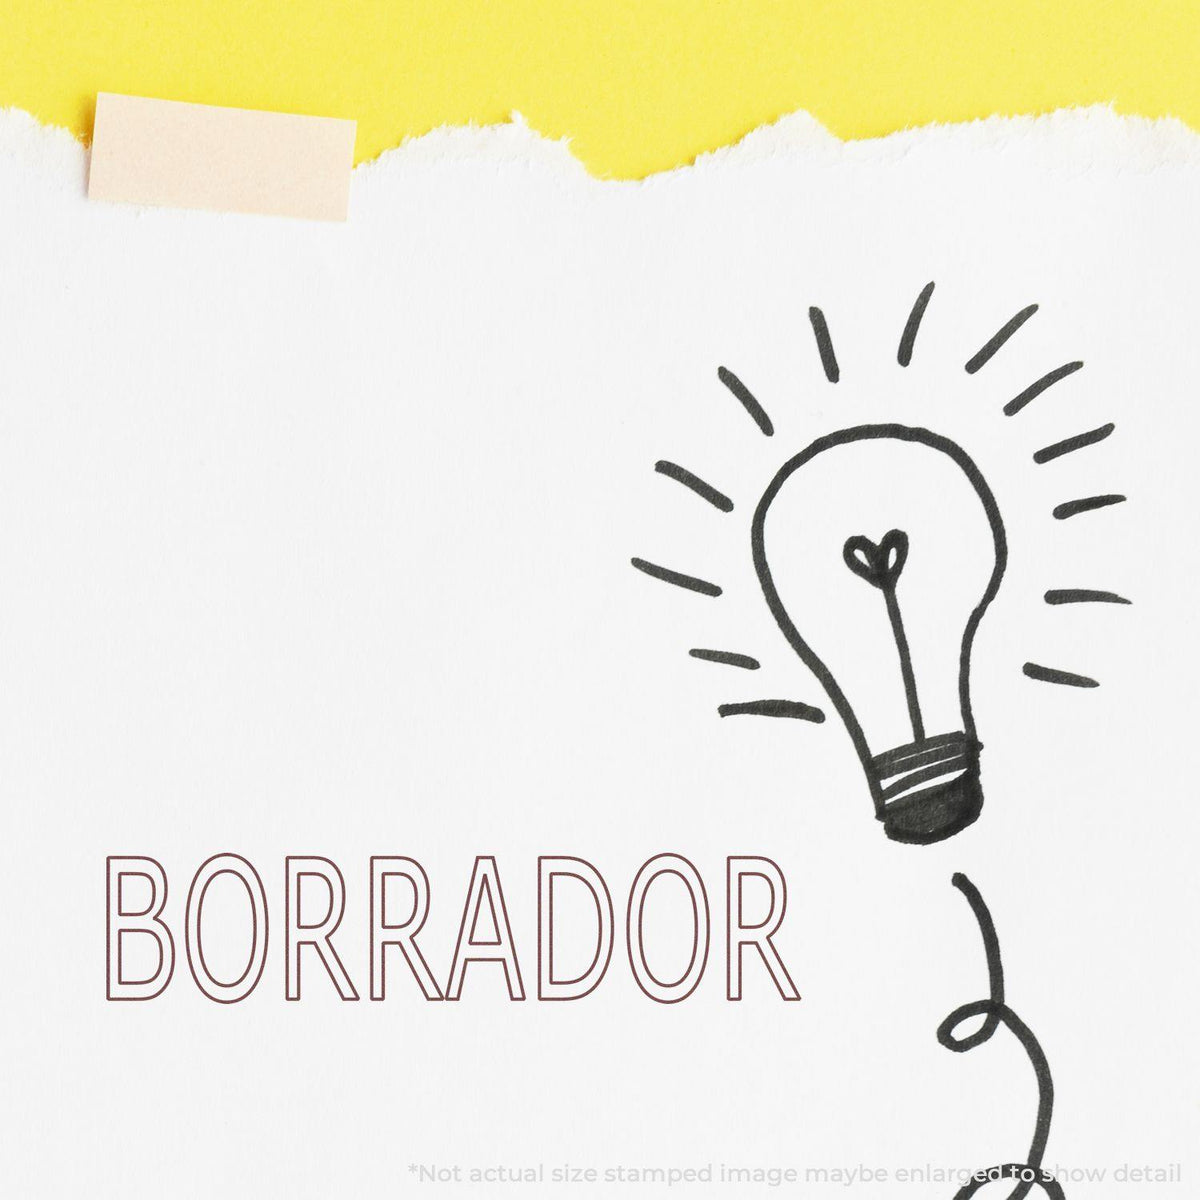 Large Borrador Rubber Stamp In Use Photo